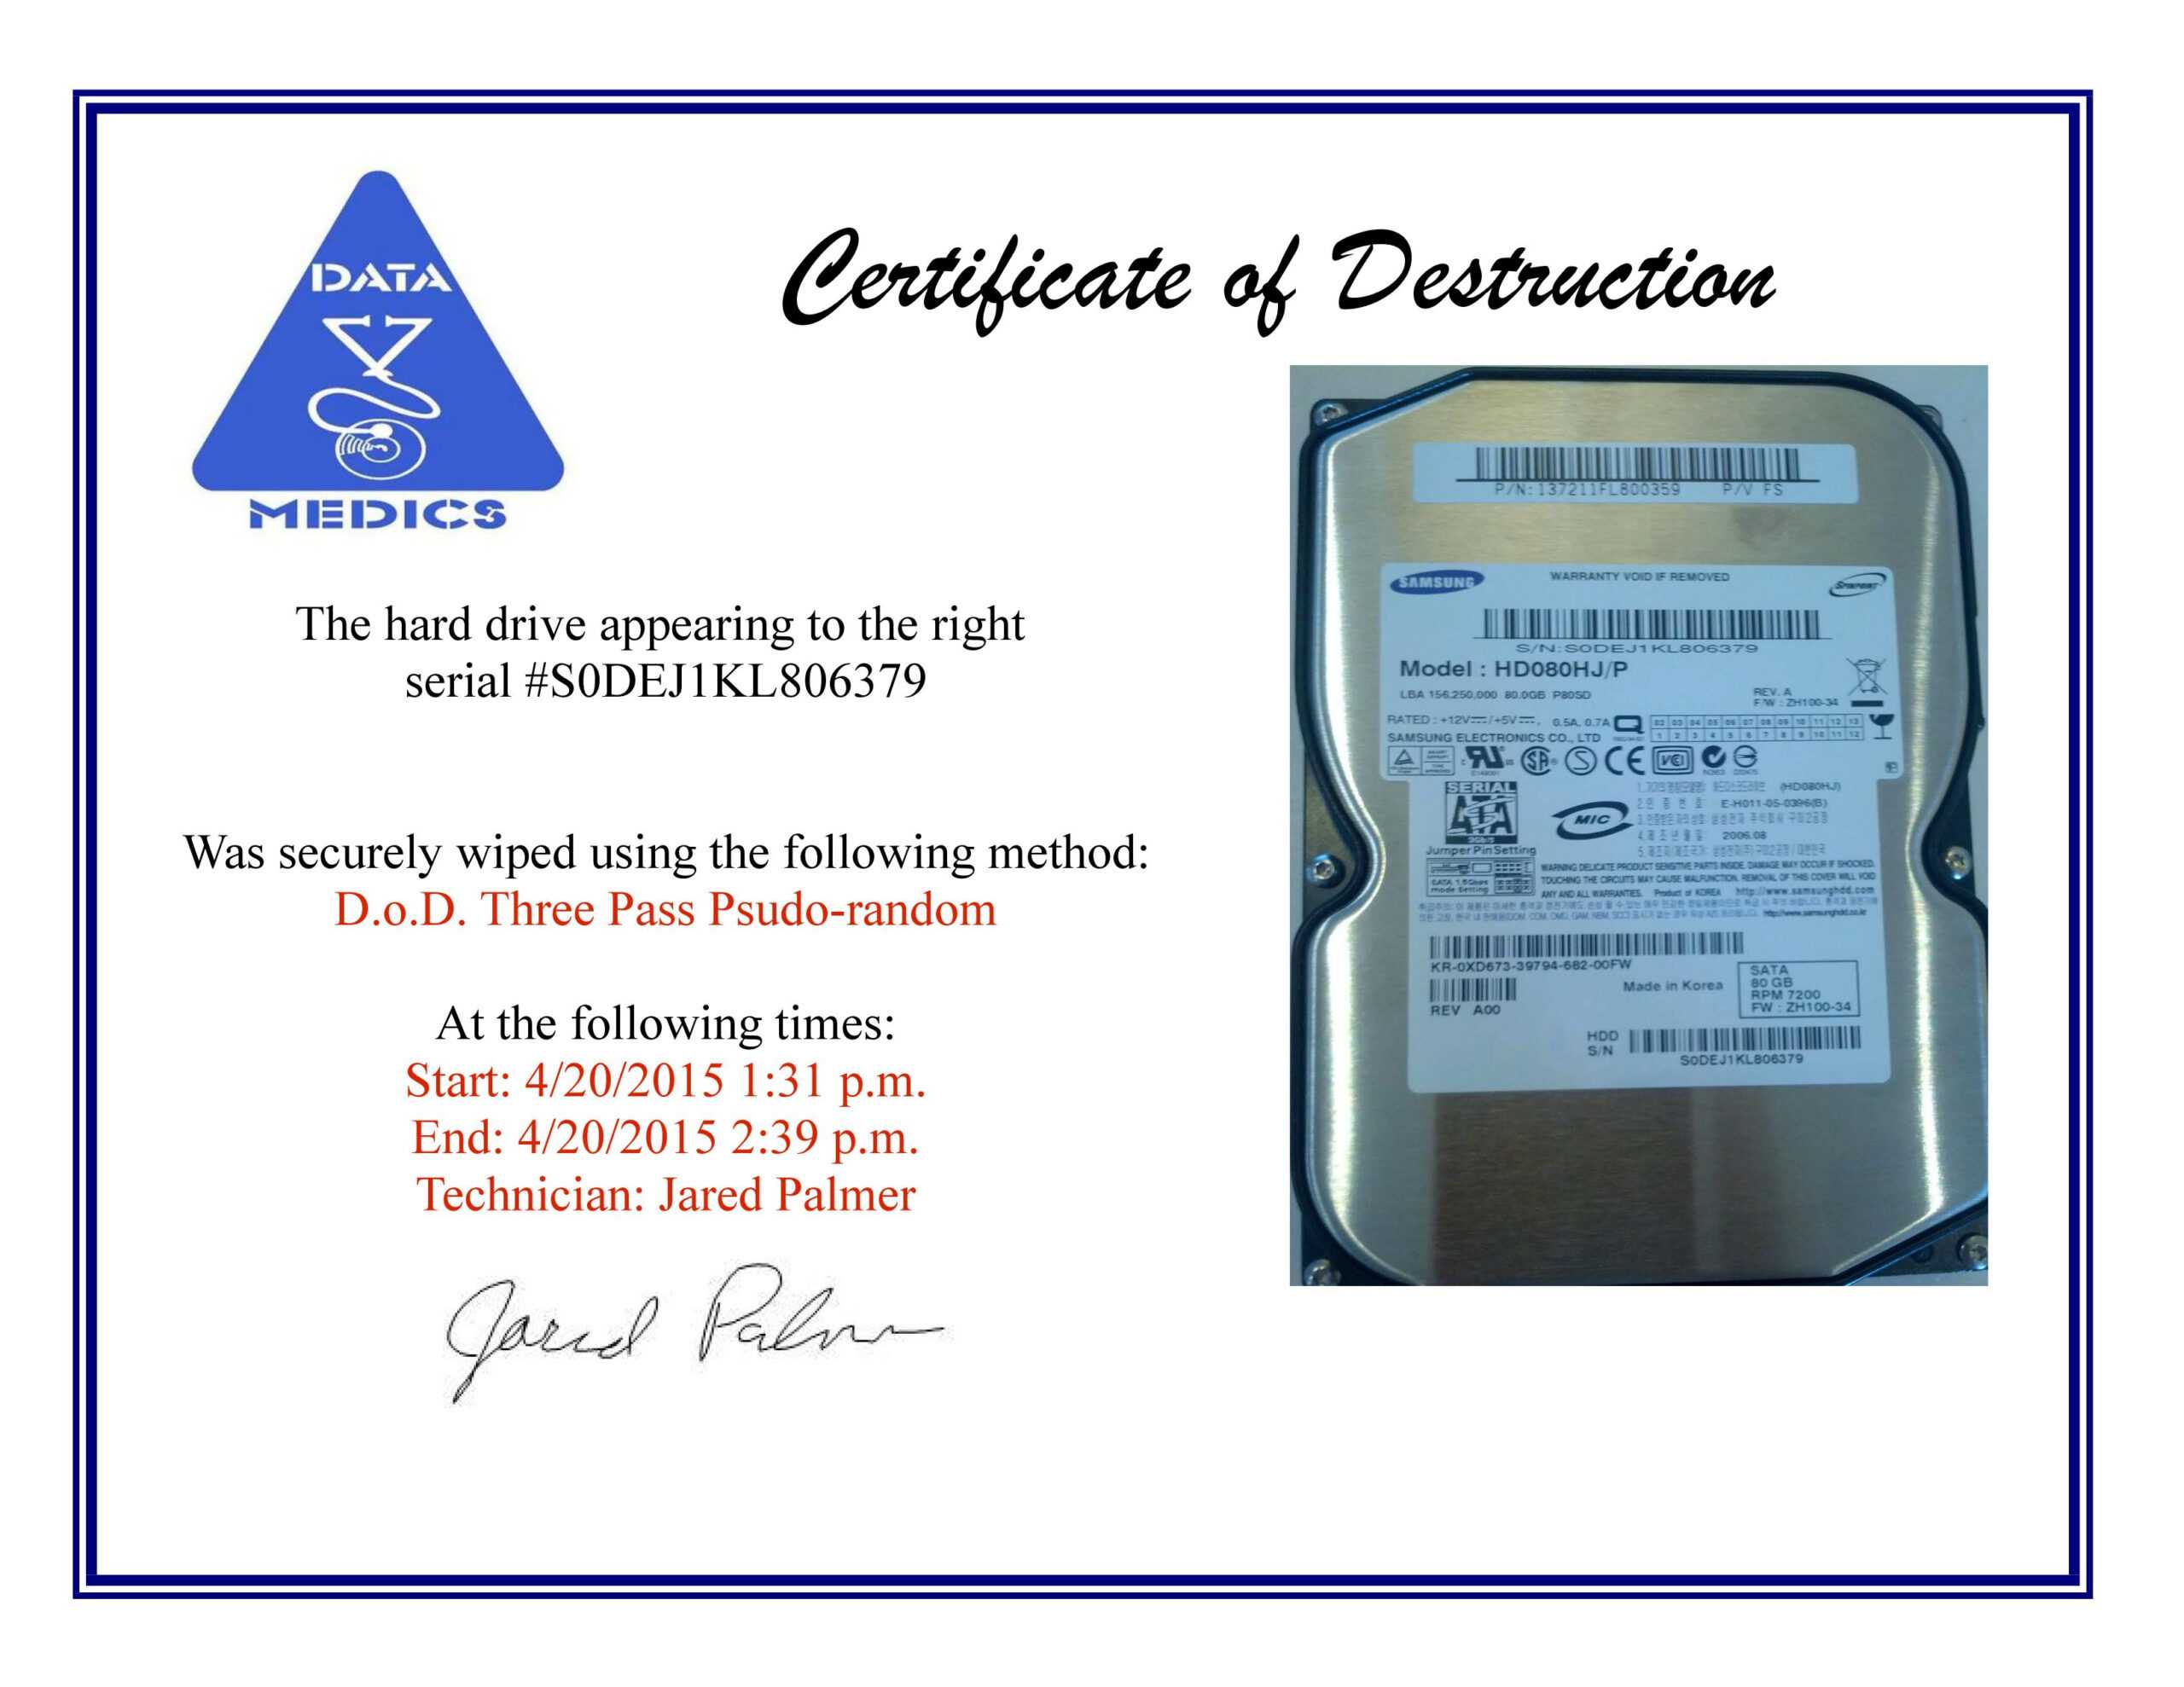 Free Hard Drive Wiping Services (Hdd Destruction) With Regard To Hard Drive Destruction Certificate Template